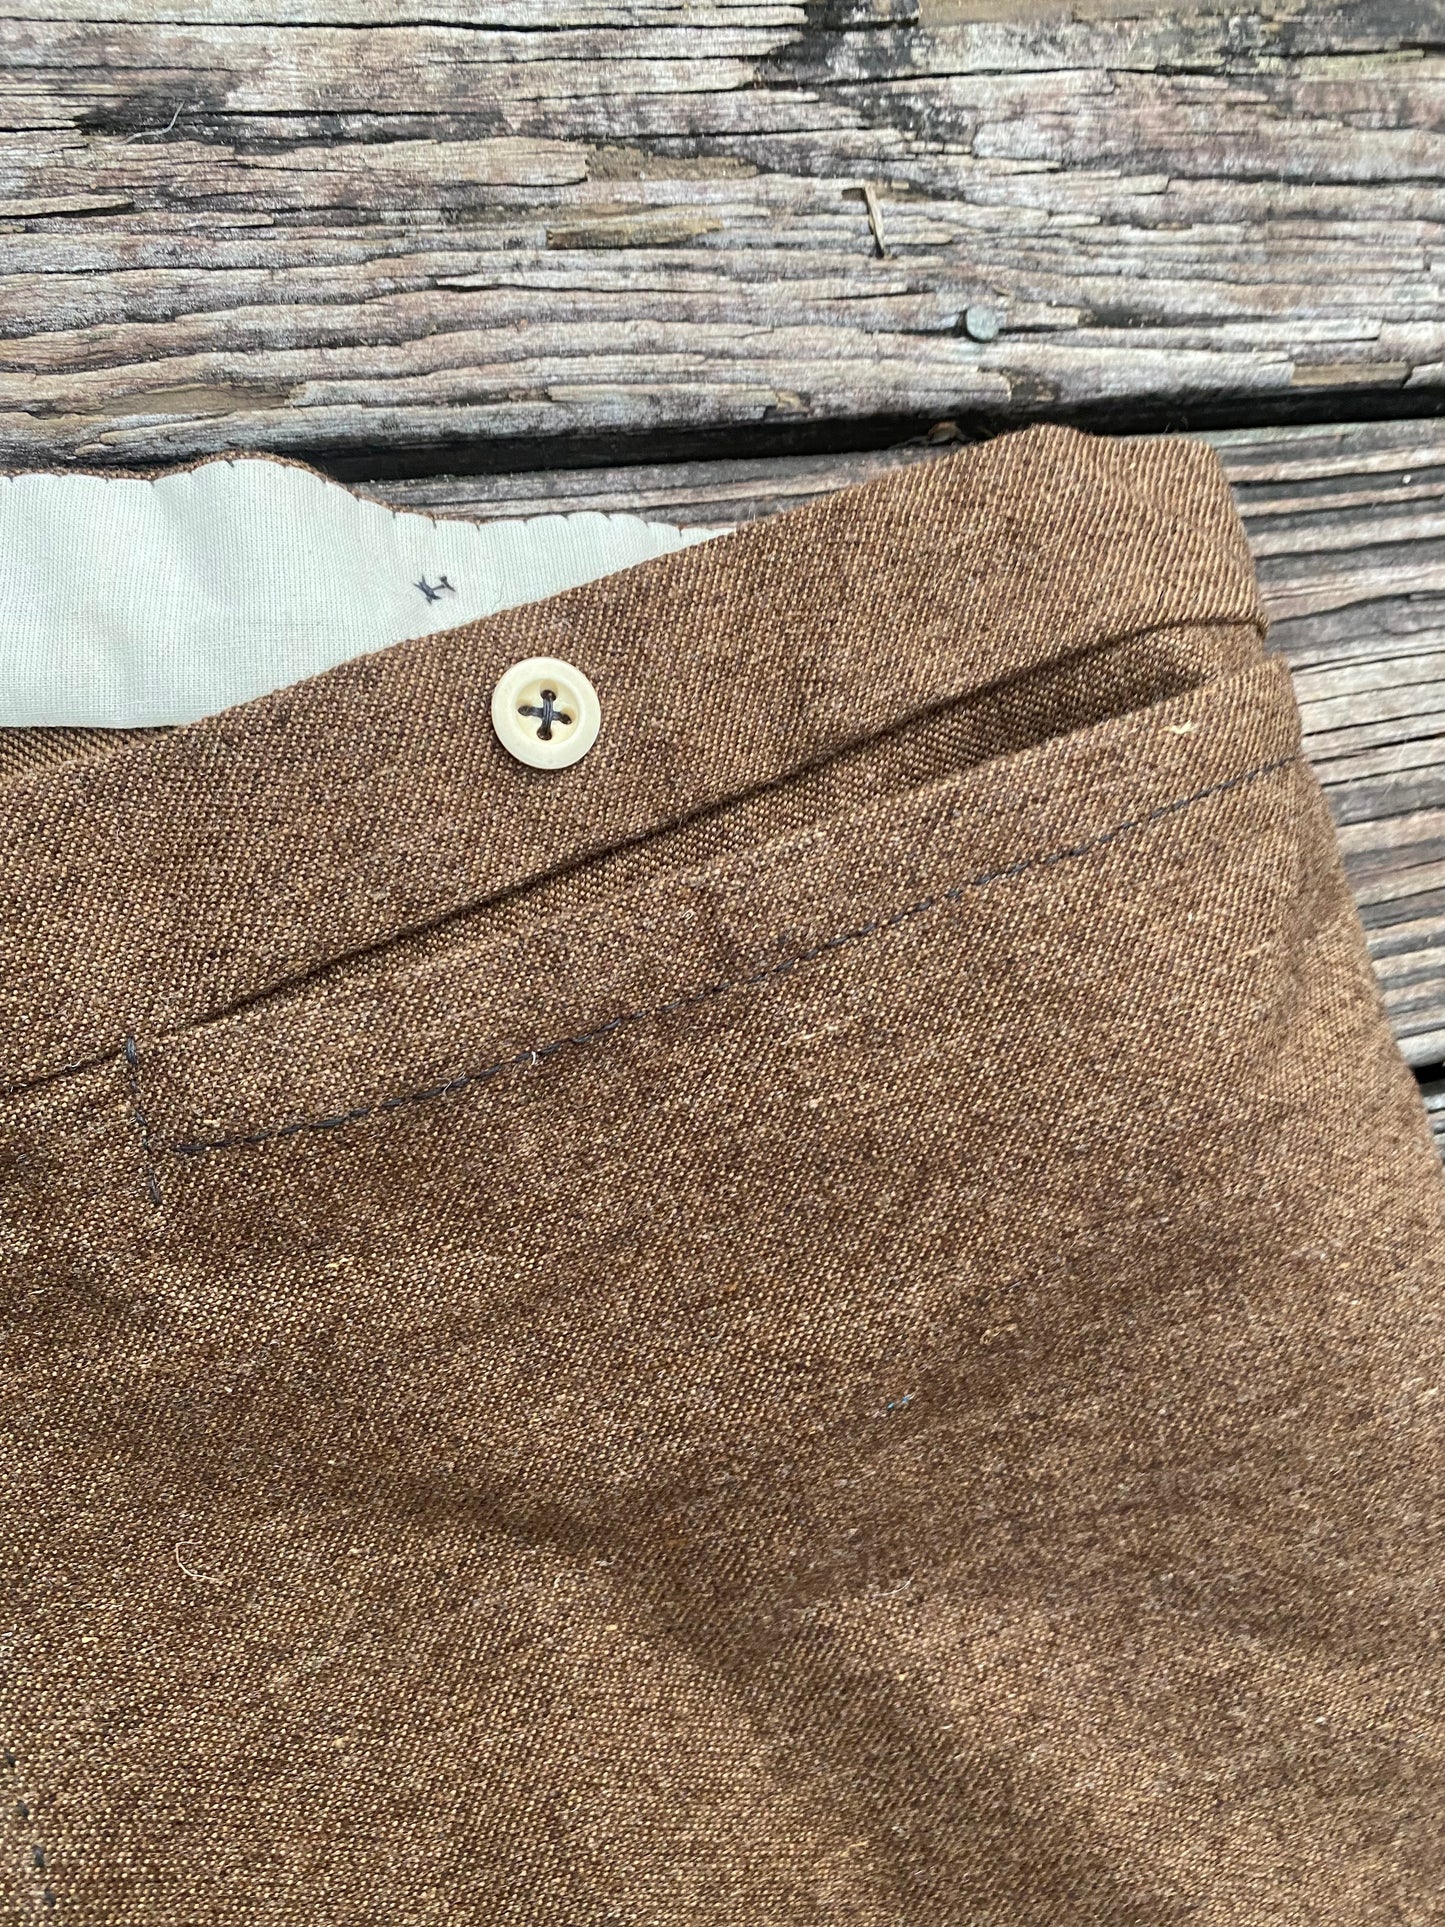 "Deep South" Mississippi Depot Trousers